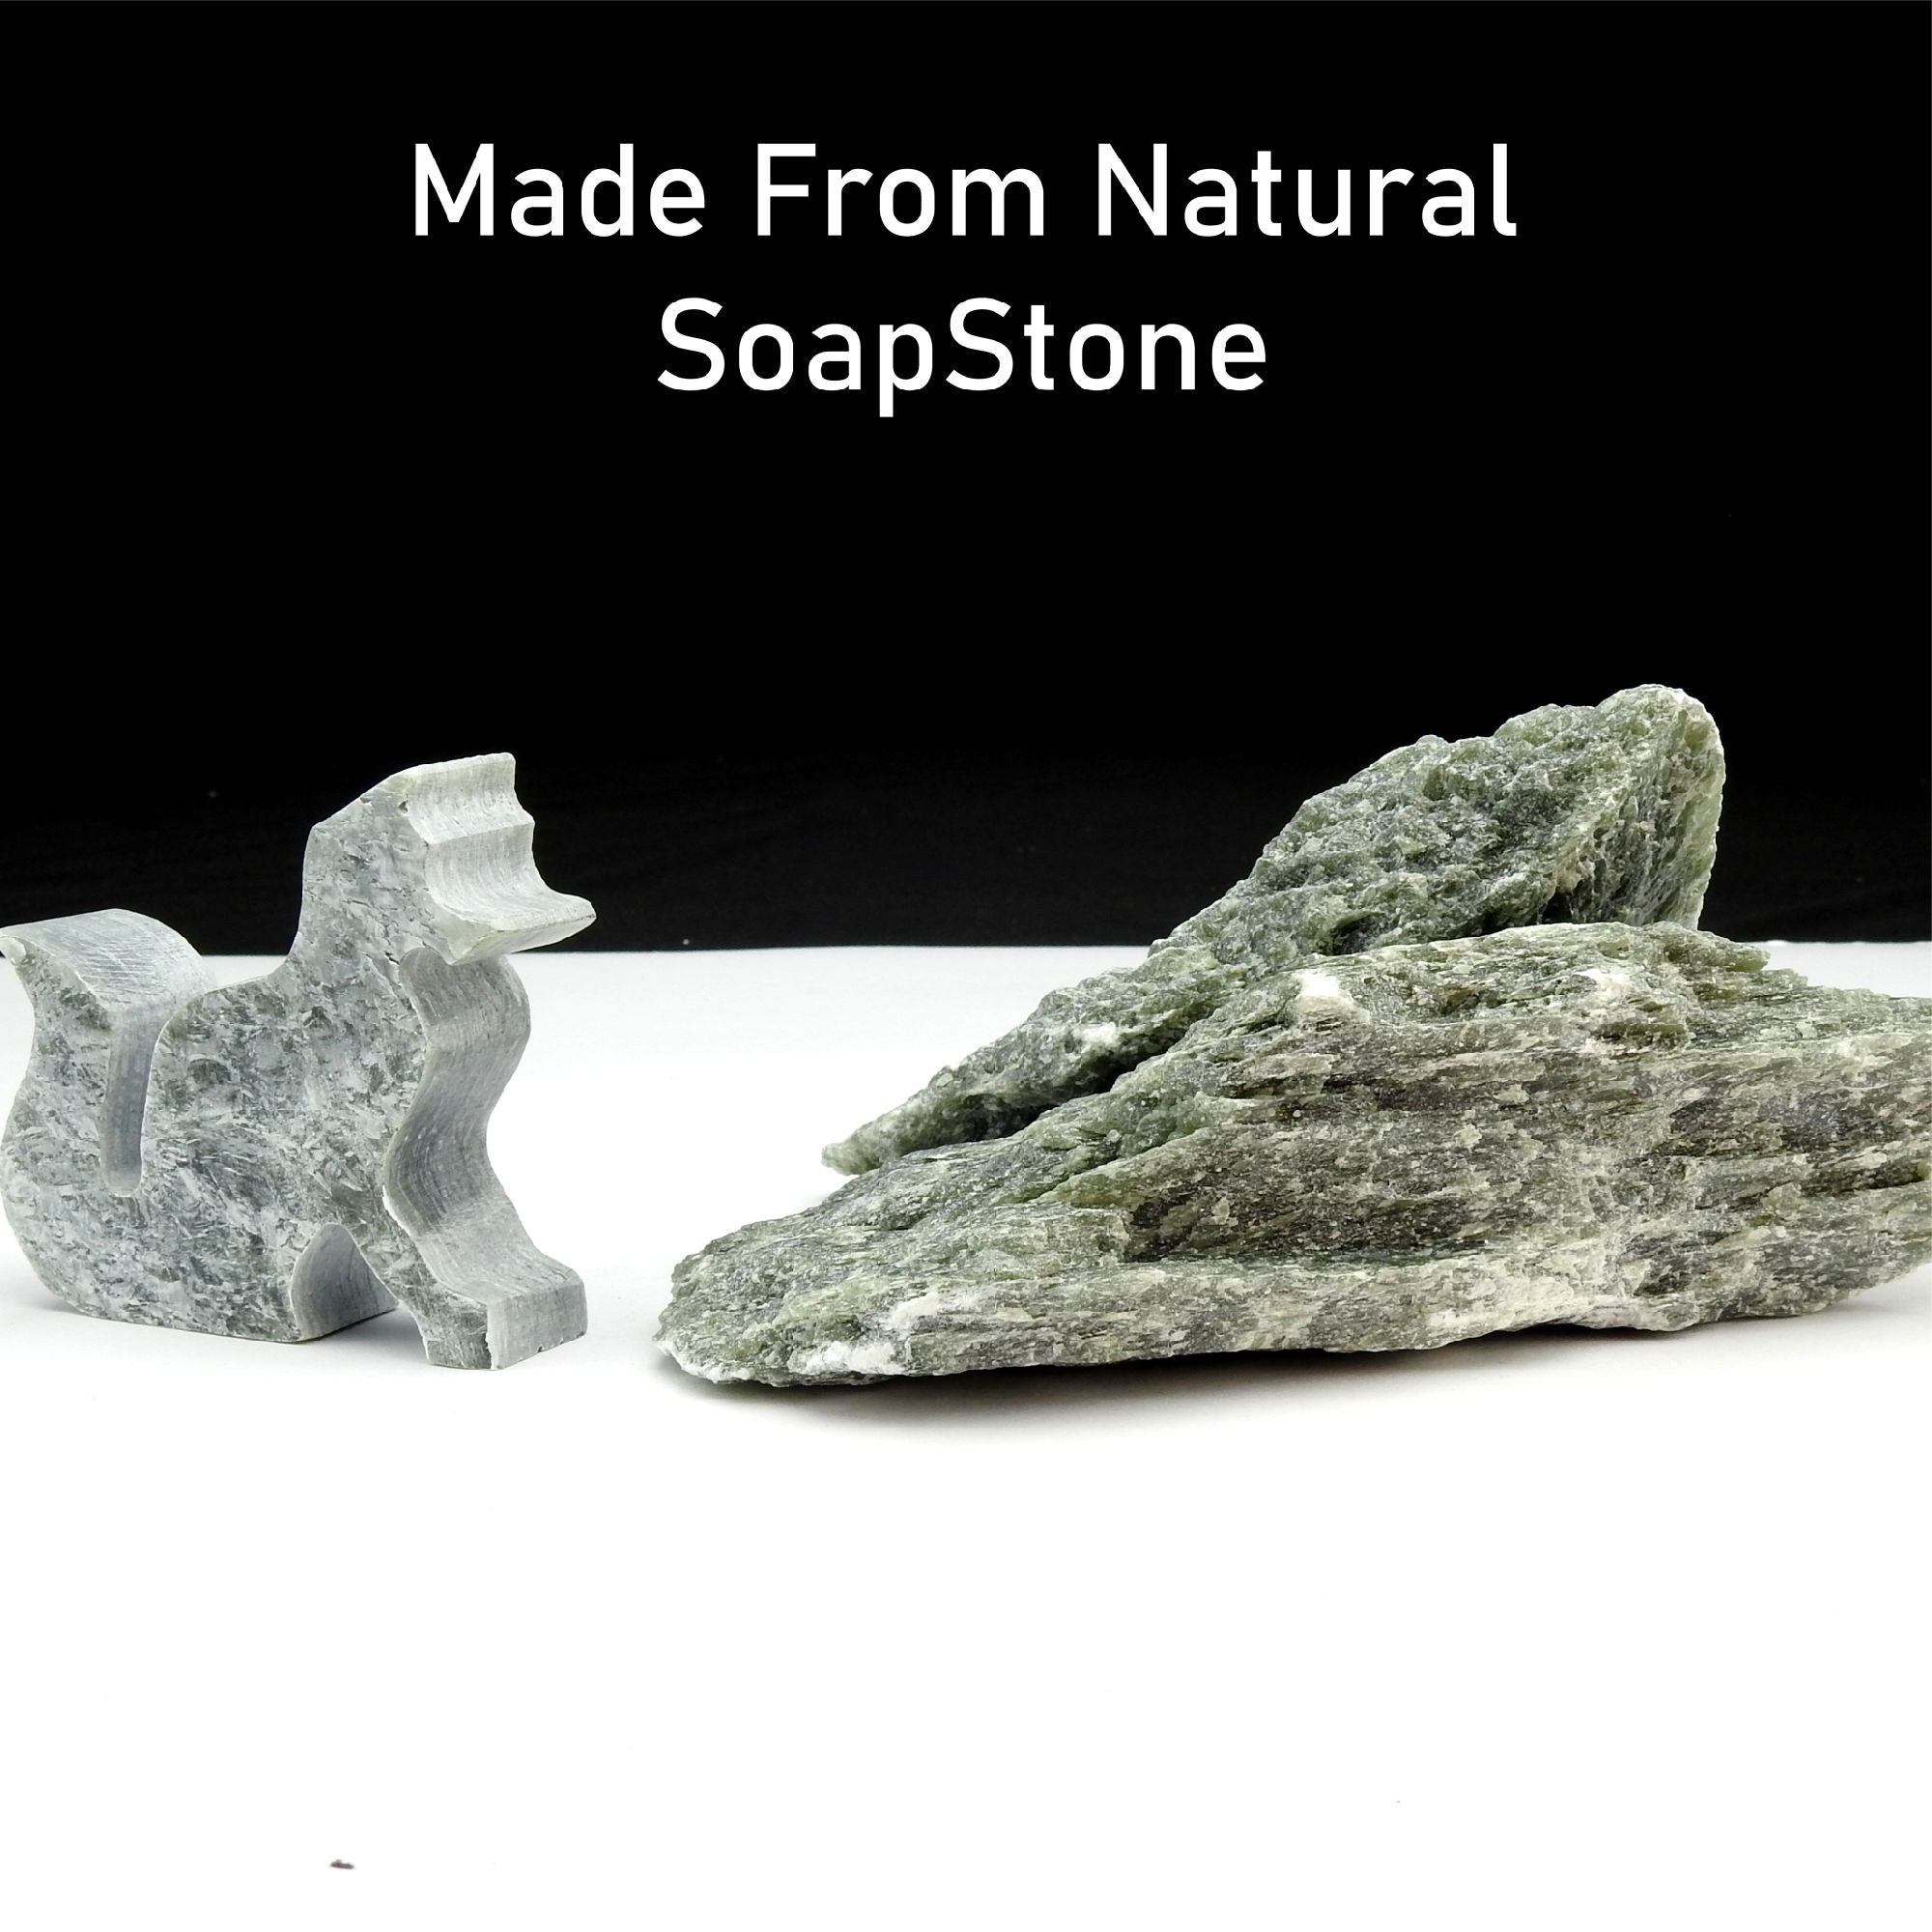 The Fox Soapstone Carving Kit: Safe and Fun DIY Craft for Kids and Adults has a picture of a man and a woman.